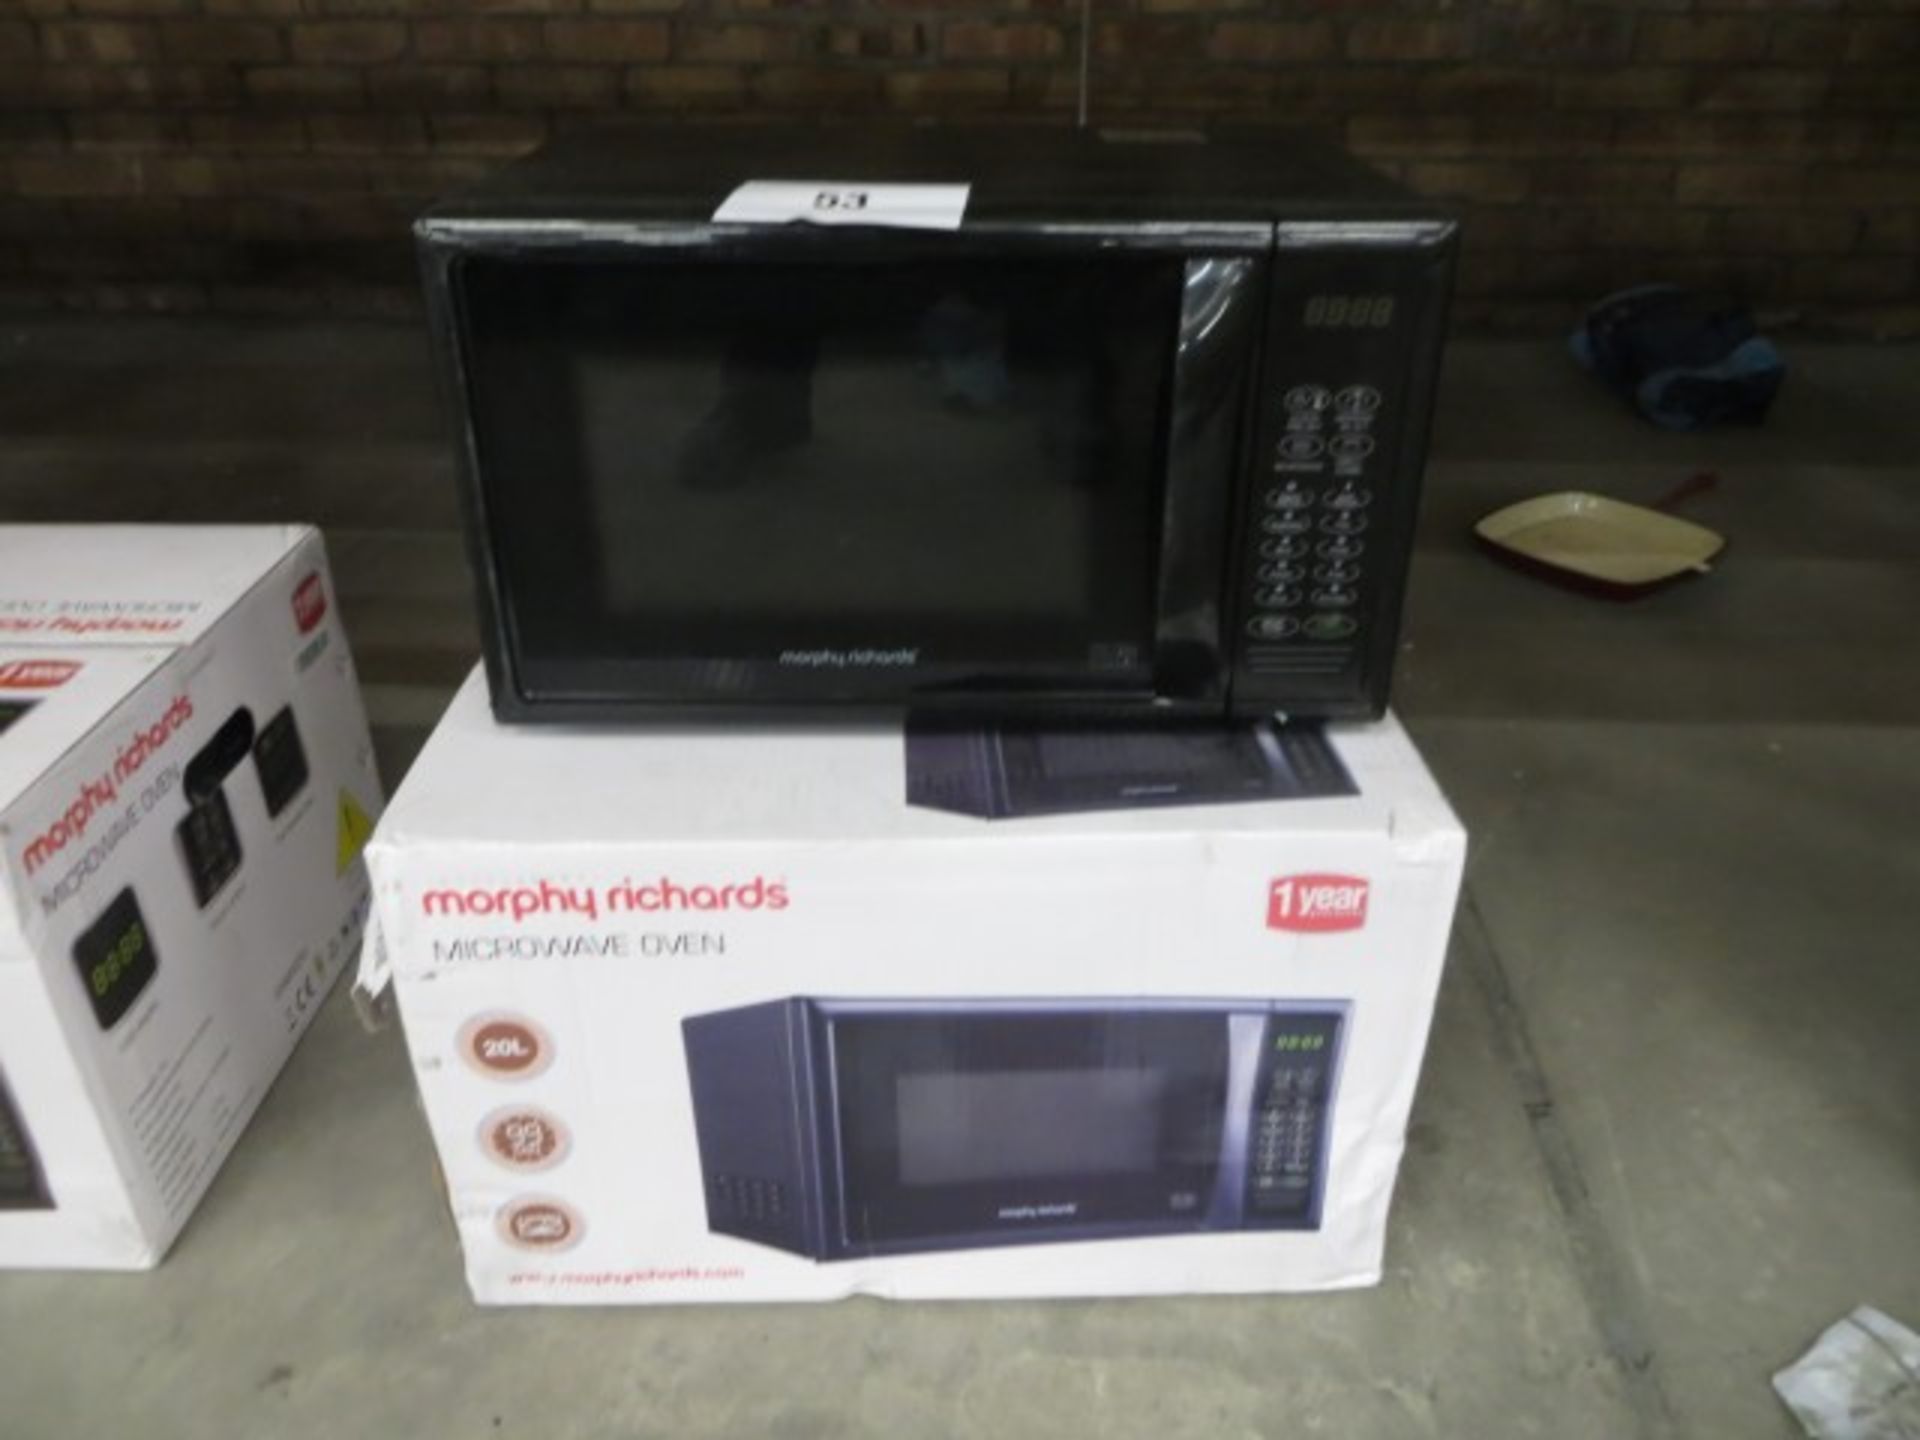 2x Morphy Richards microwave oven